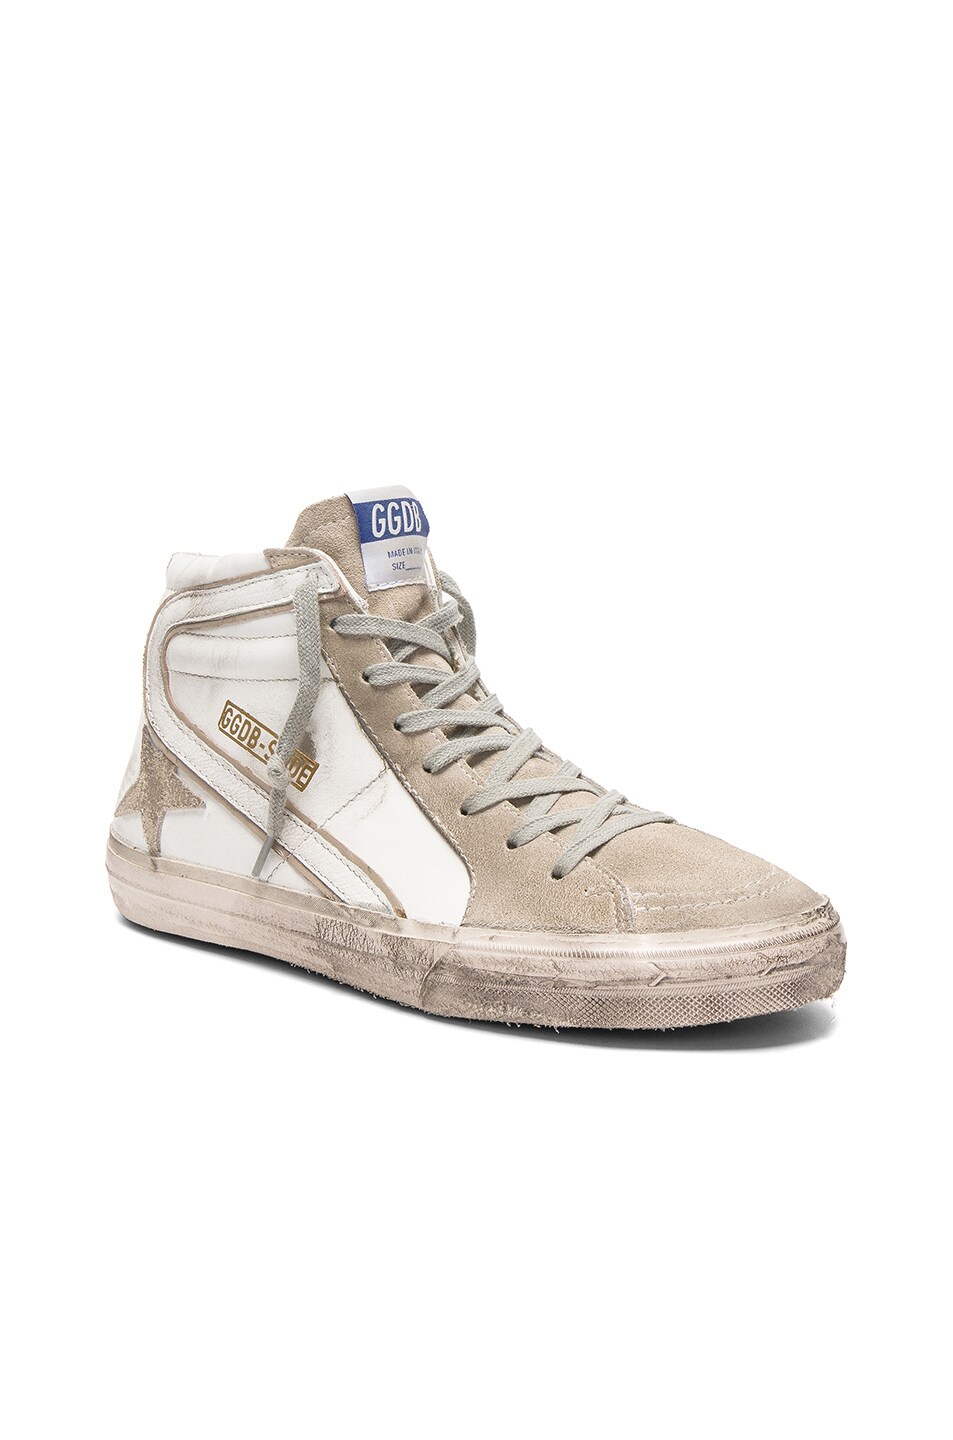 Image 1 of Golden Goose Slide Sneakers in White Leather